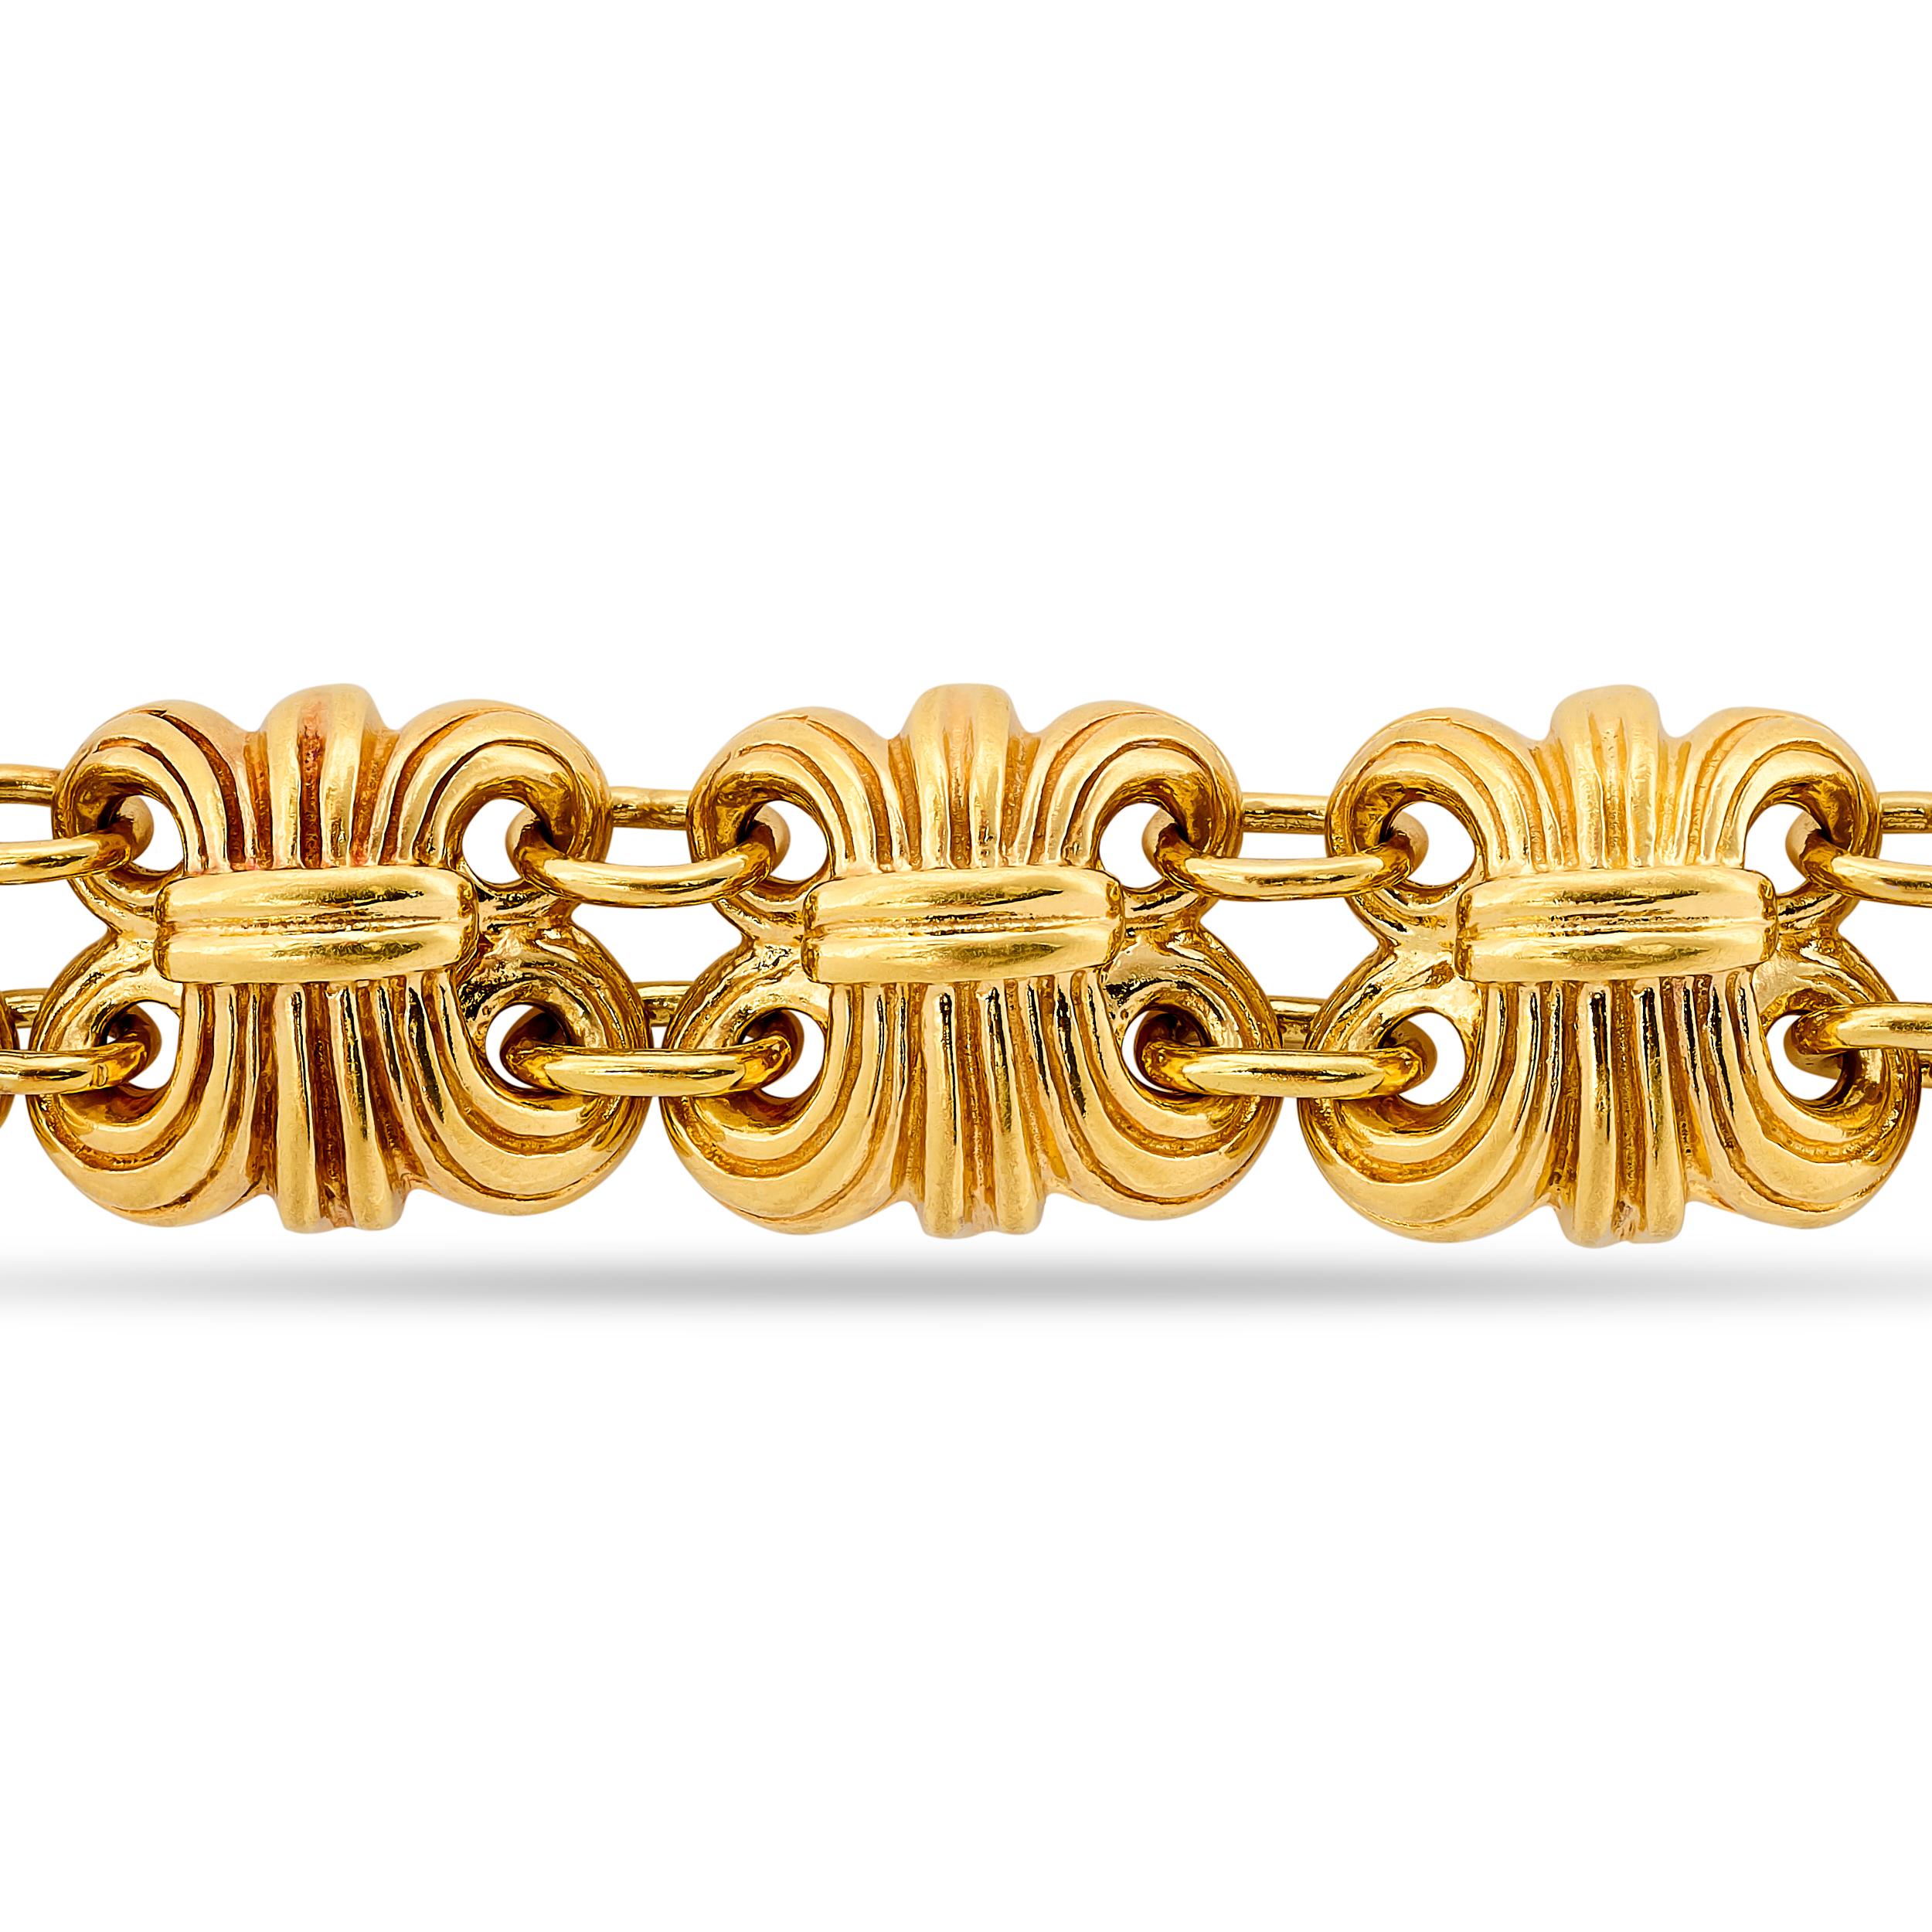 Adorn your wrist with a Lagos Fleur de Lis style gold bracelet, an intricate design with timeless sophistication.

Made in 22 karat yellow gold with an 18 karat catch.
Bracelet length is 7